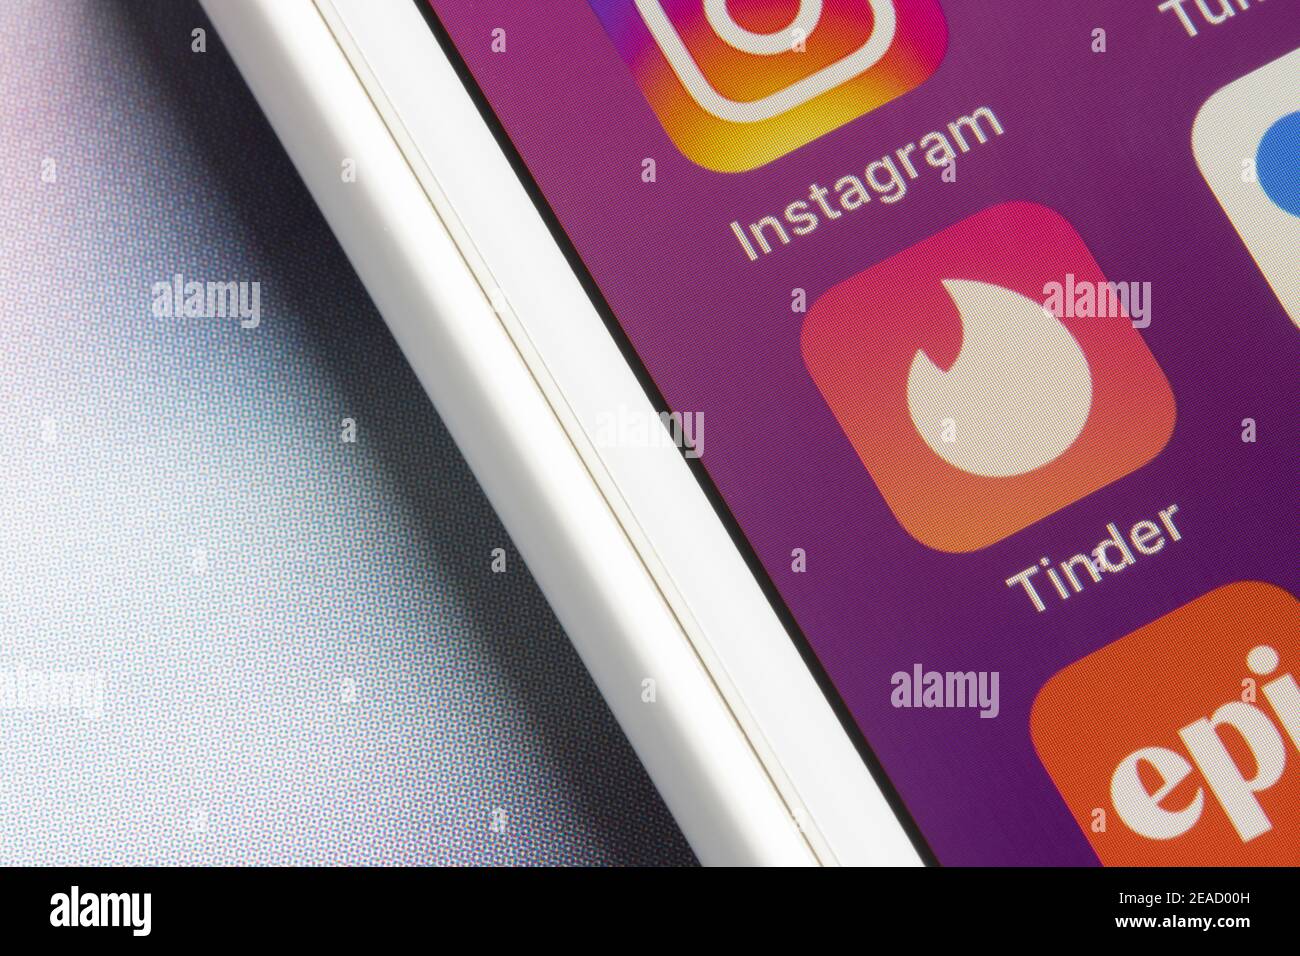 Tinder app icon is seen on an iPhone on February 8, 2021. Tinder is a geosocial networking and online dating app. Stock Photo